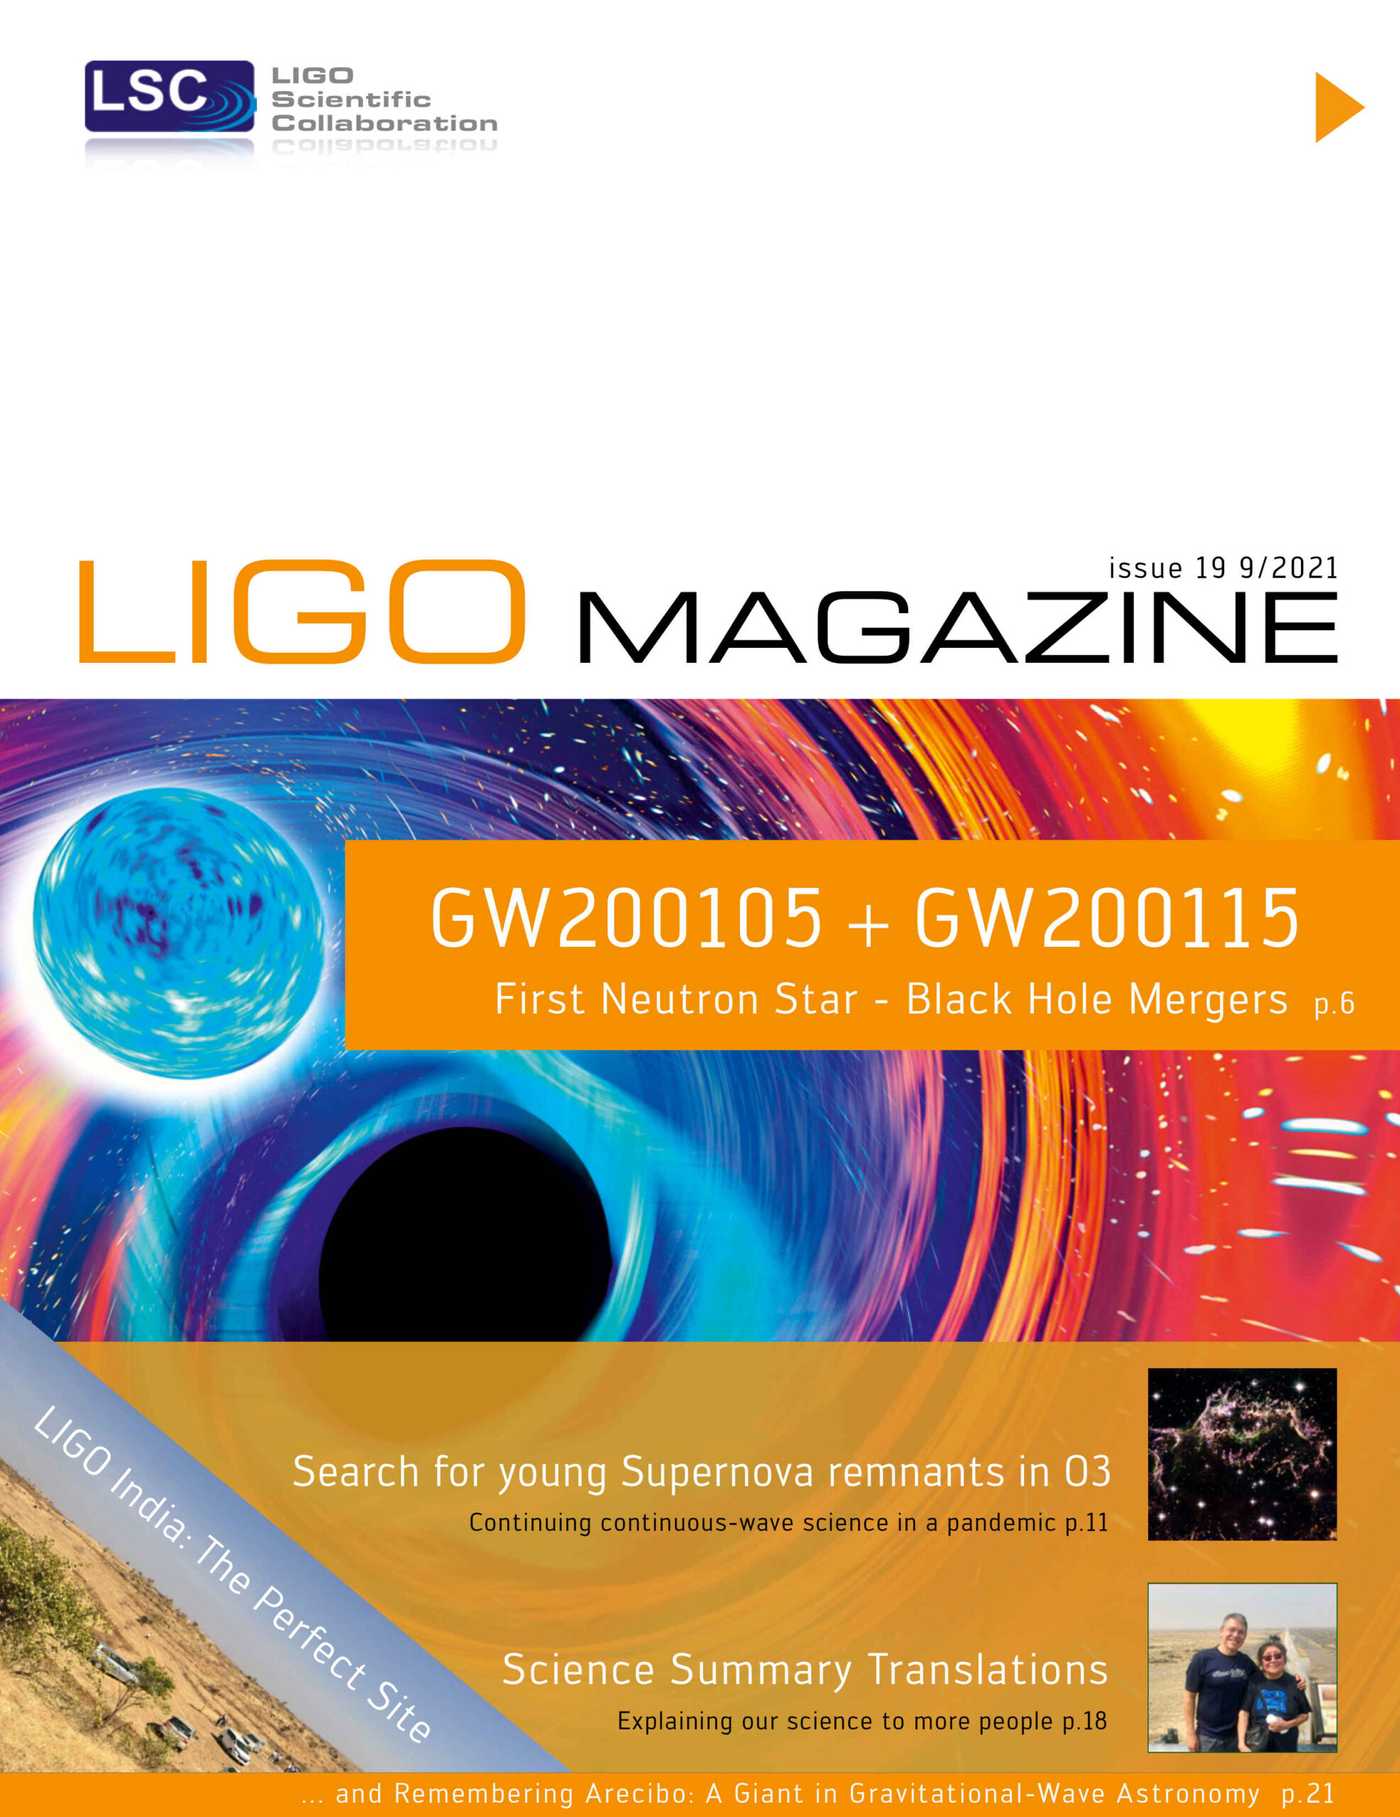 News-Image 36 of: New LIGO Magazine Issue 19 is out